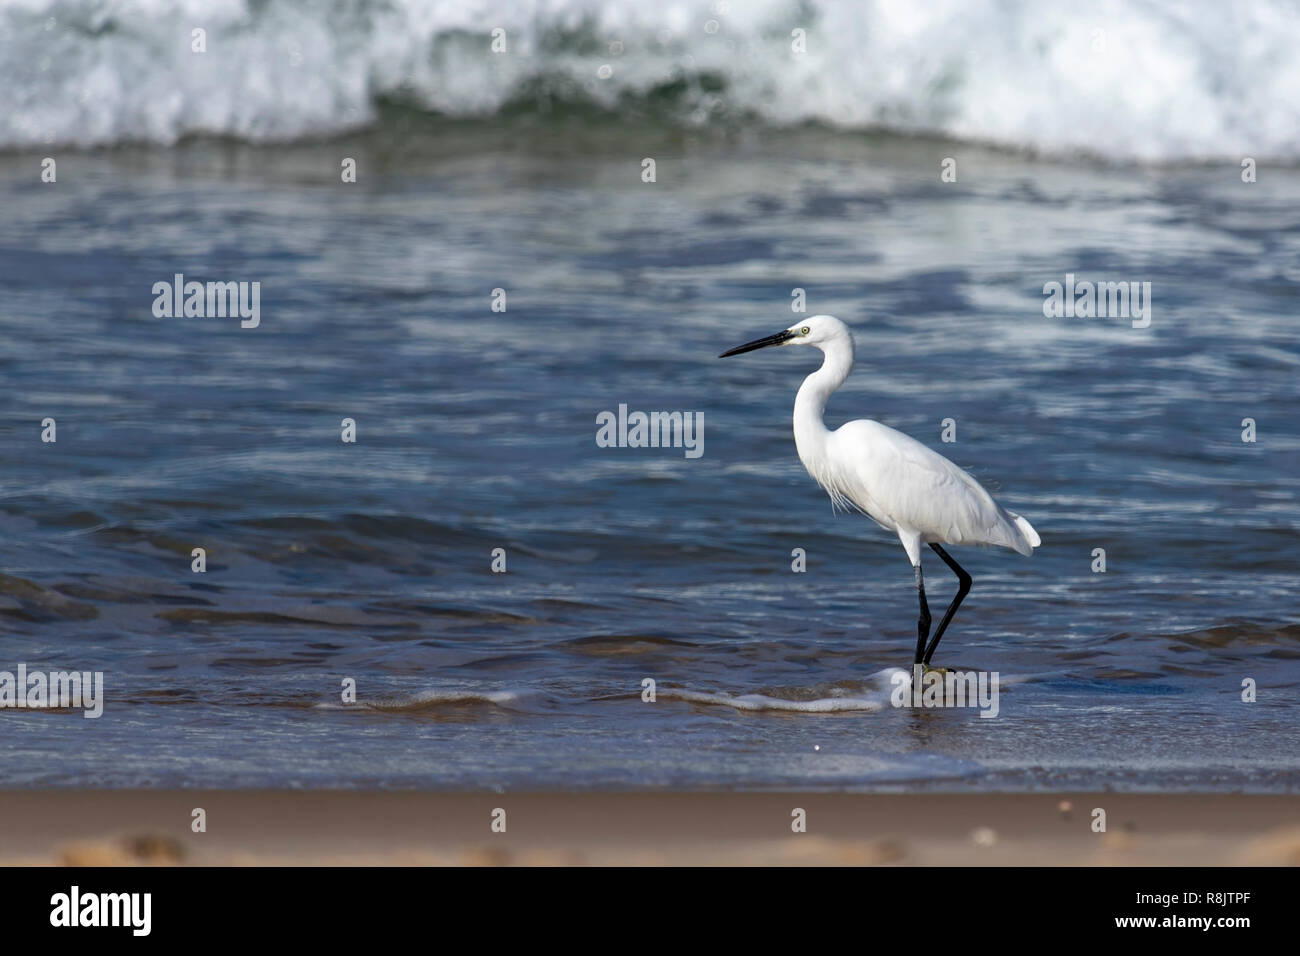 Side view of a white little heron bird standing on the foam waves of the sea shore close-up. Israel Stock Photo